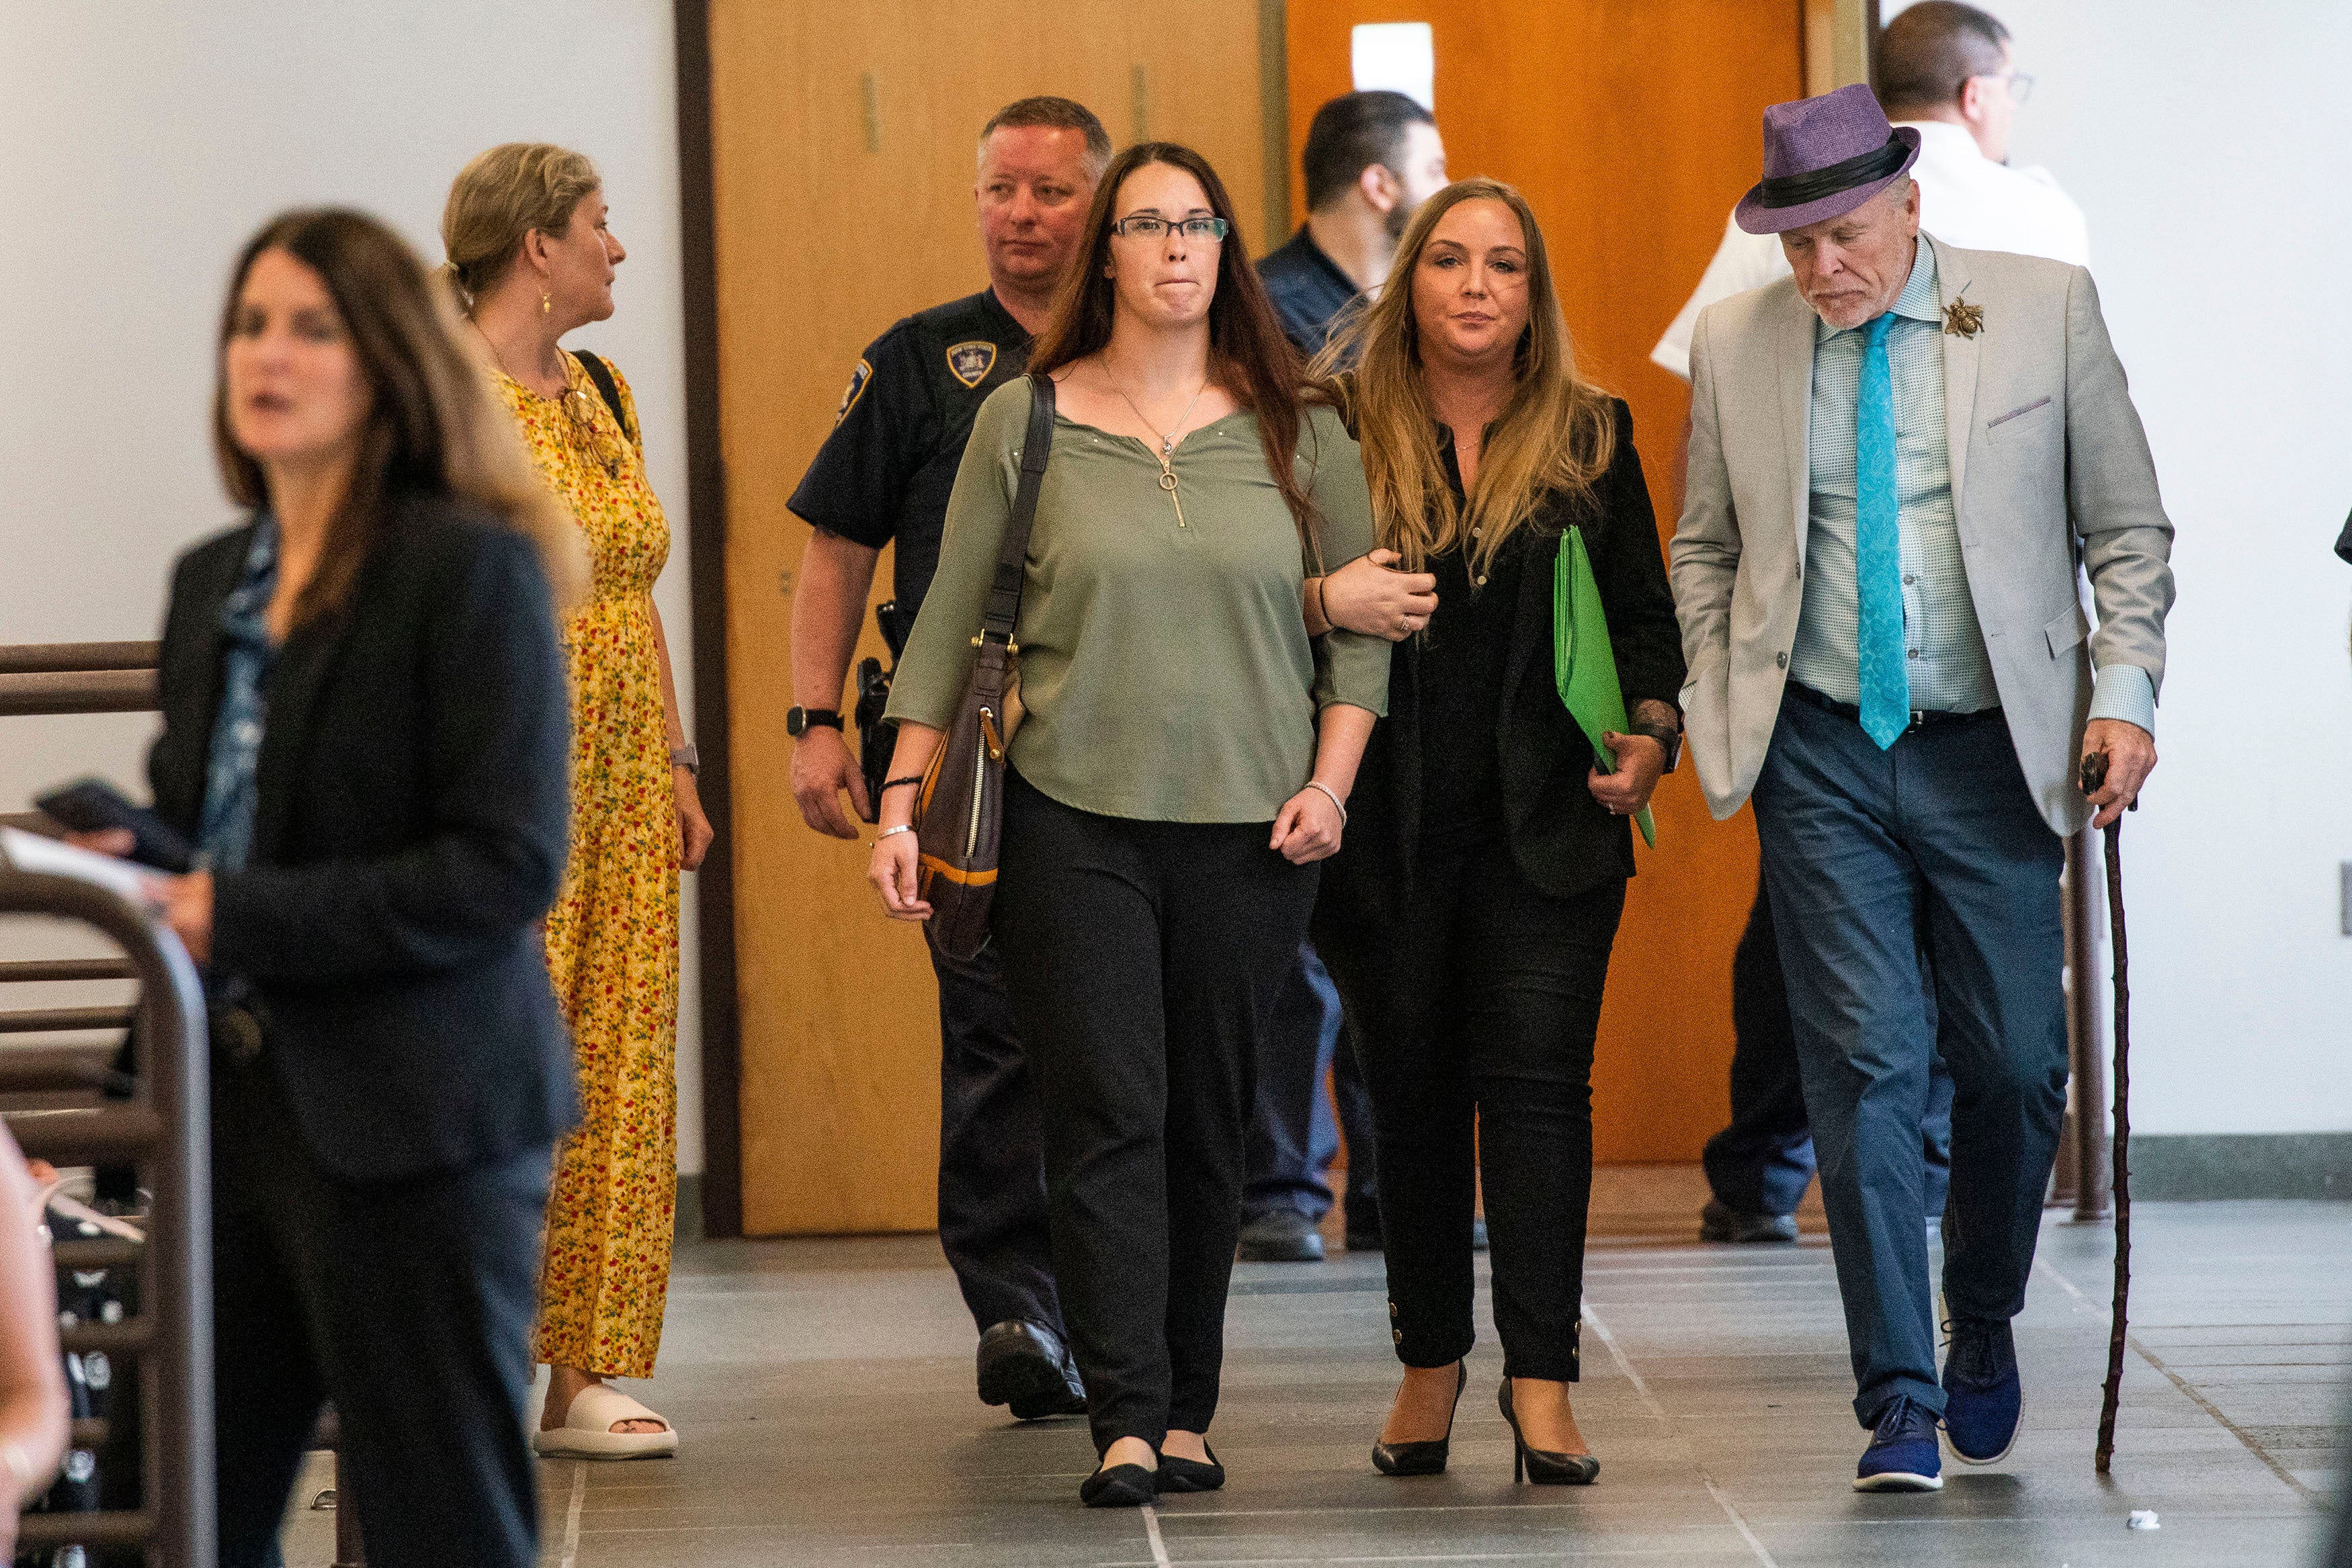 Families of victims leave court after Rex Heuermann’s initial court appearance